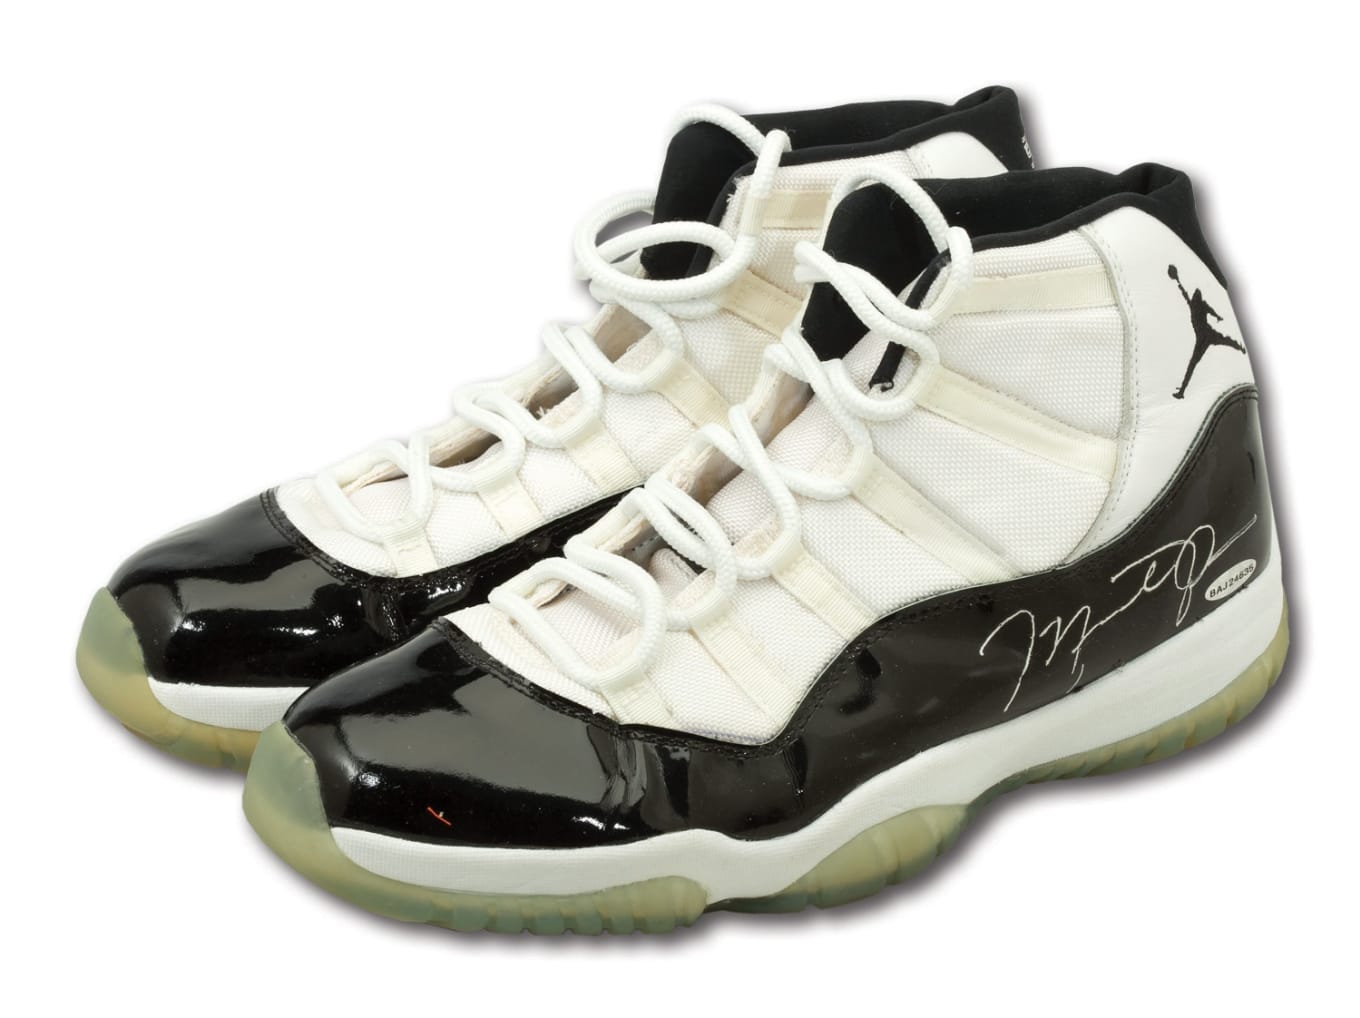 where can i buy the concord 11